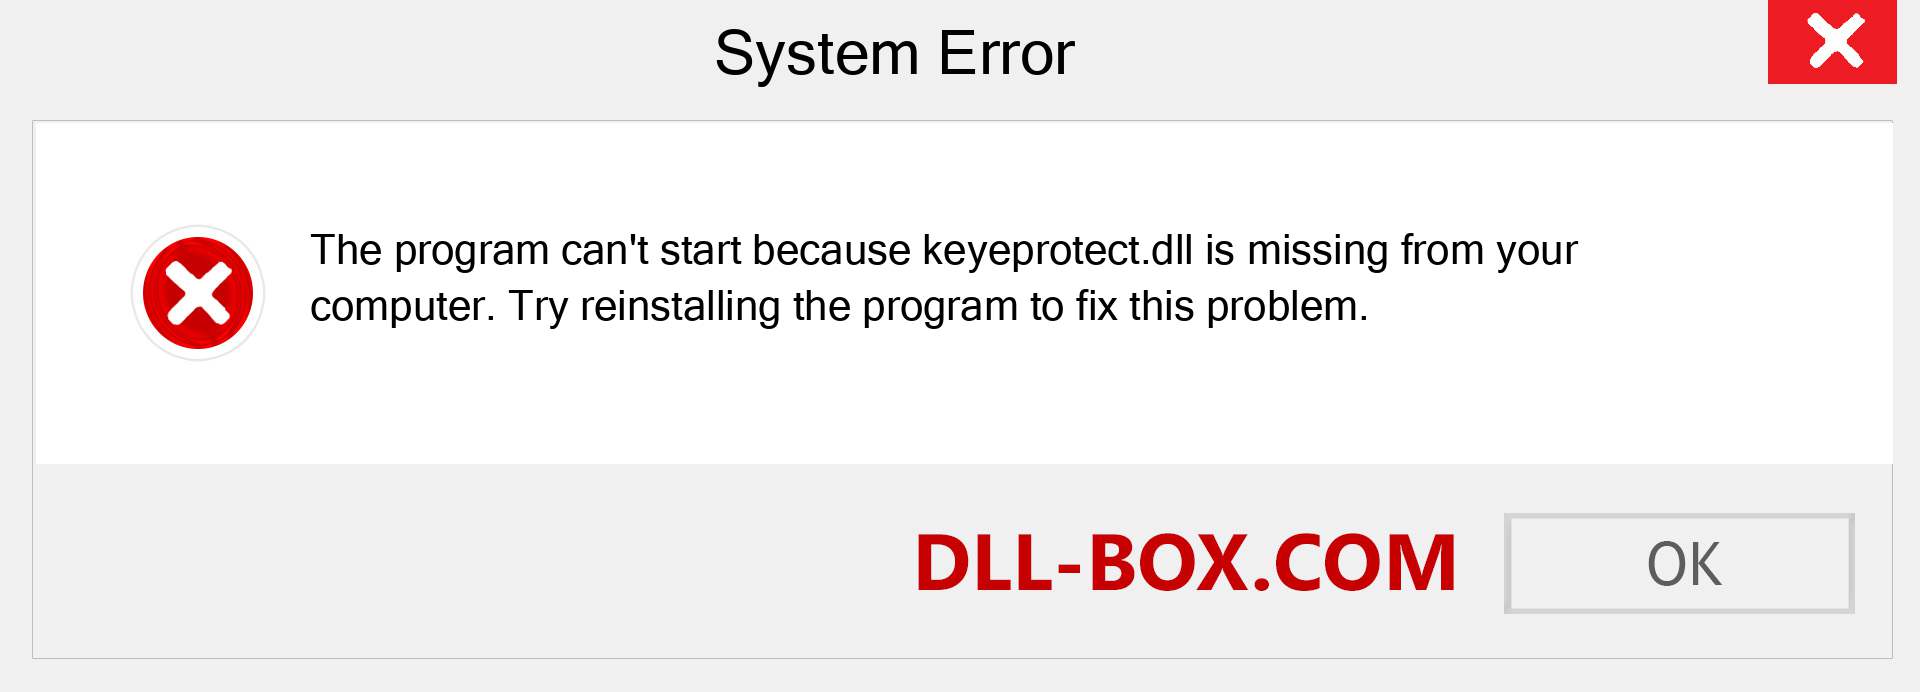  keyeprotect.dll file is missing?. Download for Windows 7, 8, 10 - Fix  keyeprotect dll Missing Error on Windows, photos, images